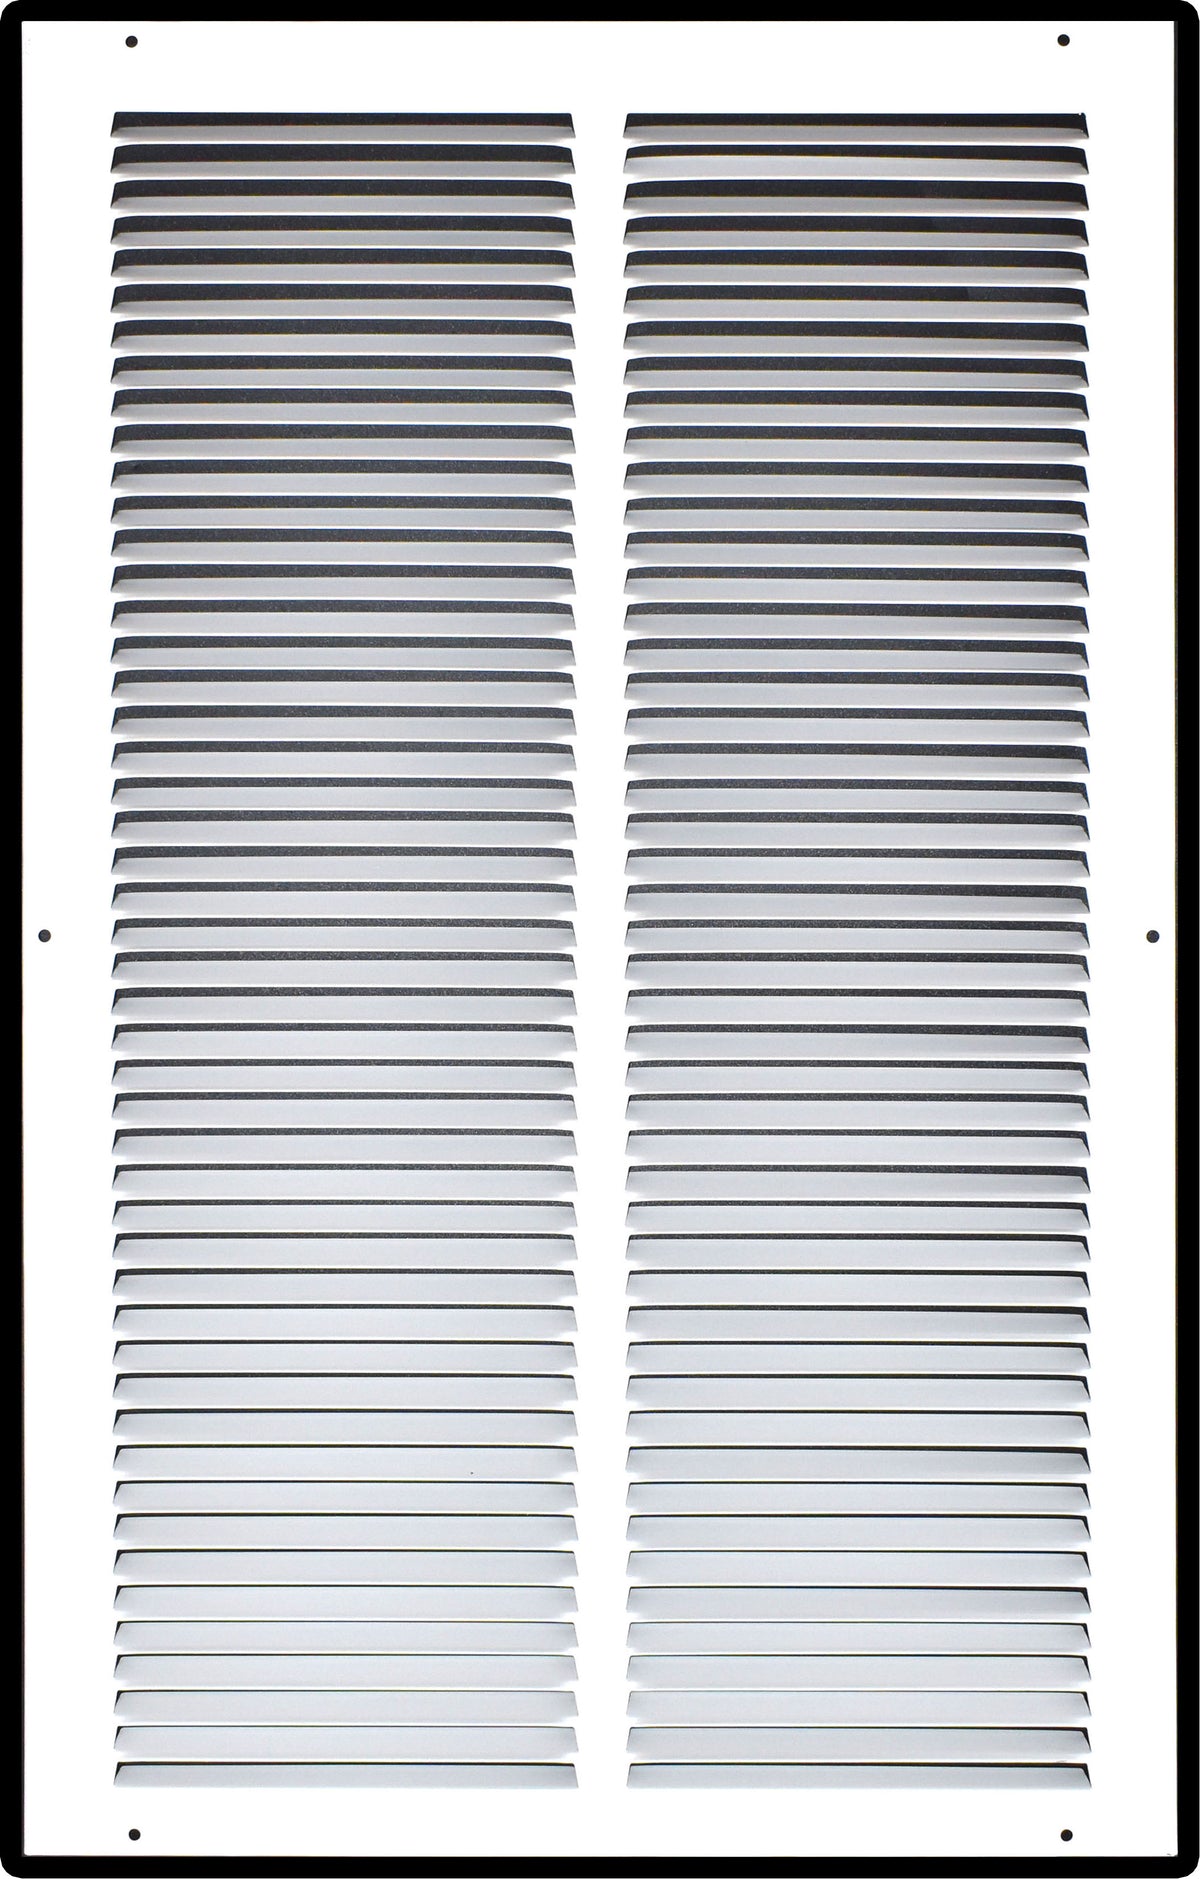 airgrilles 14" x 24" duct opening  -  hd steel return air grille for sidewall and ceiling (agc) 7agc-flt-wh-14x24 756014649536 - 1